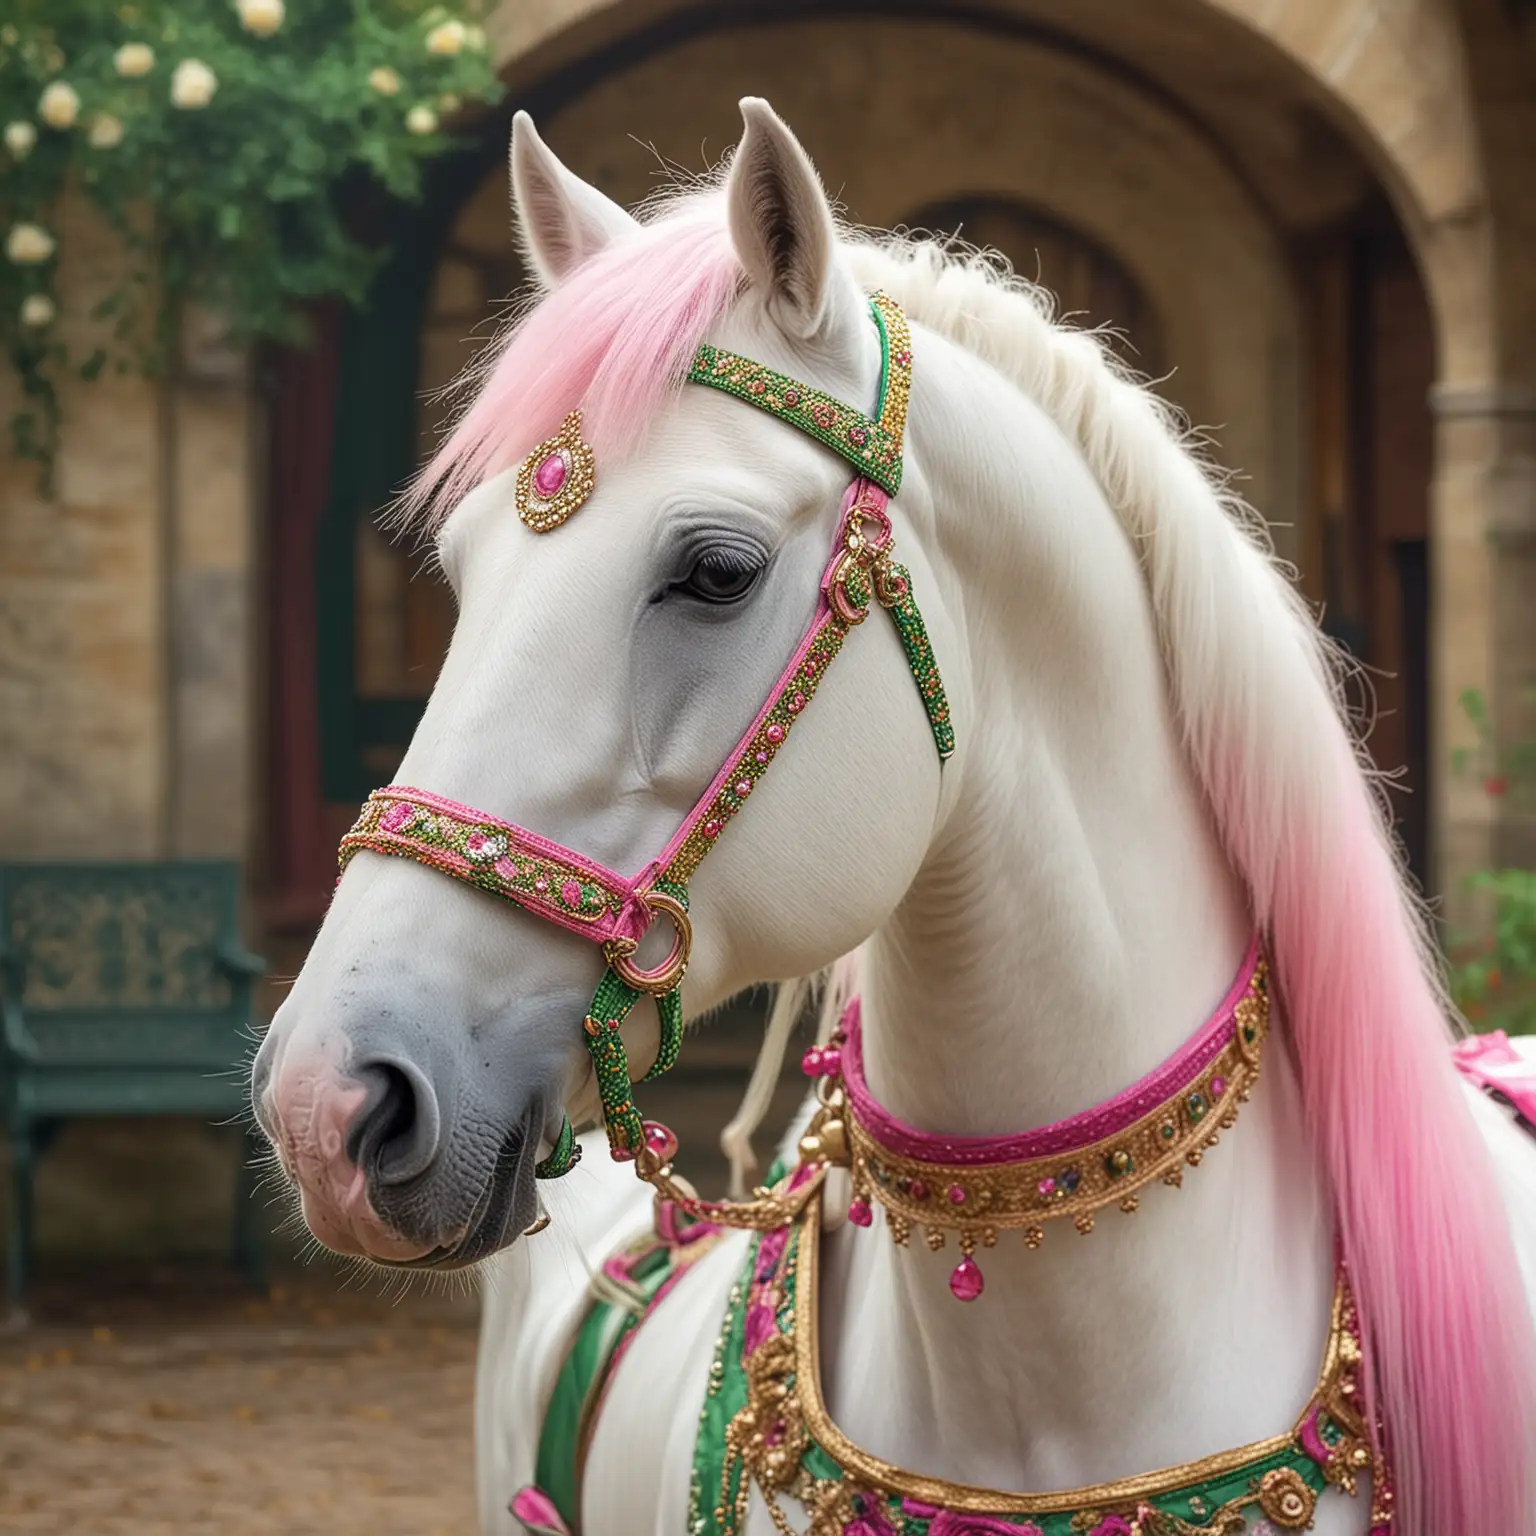 Adorable White Fairytale Horse in Vivid Green and Pink Costume